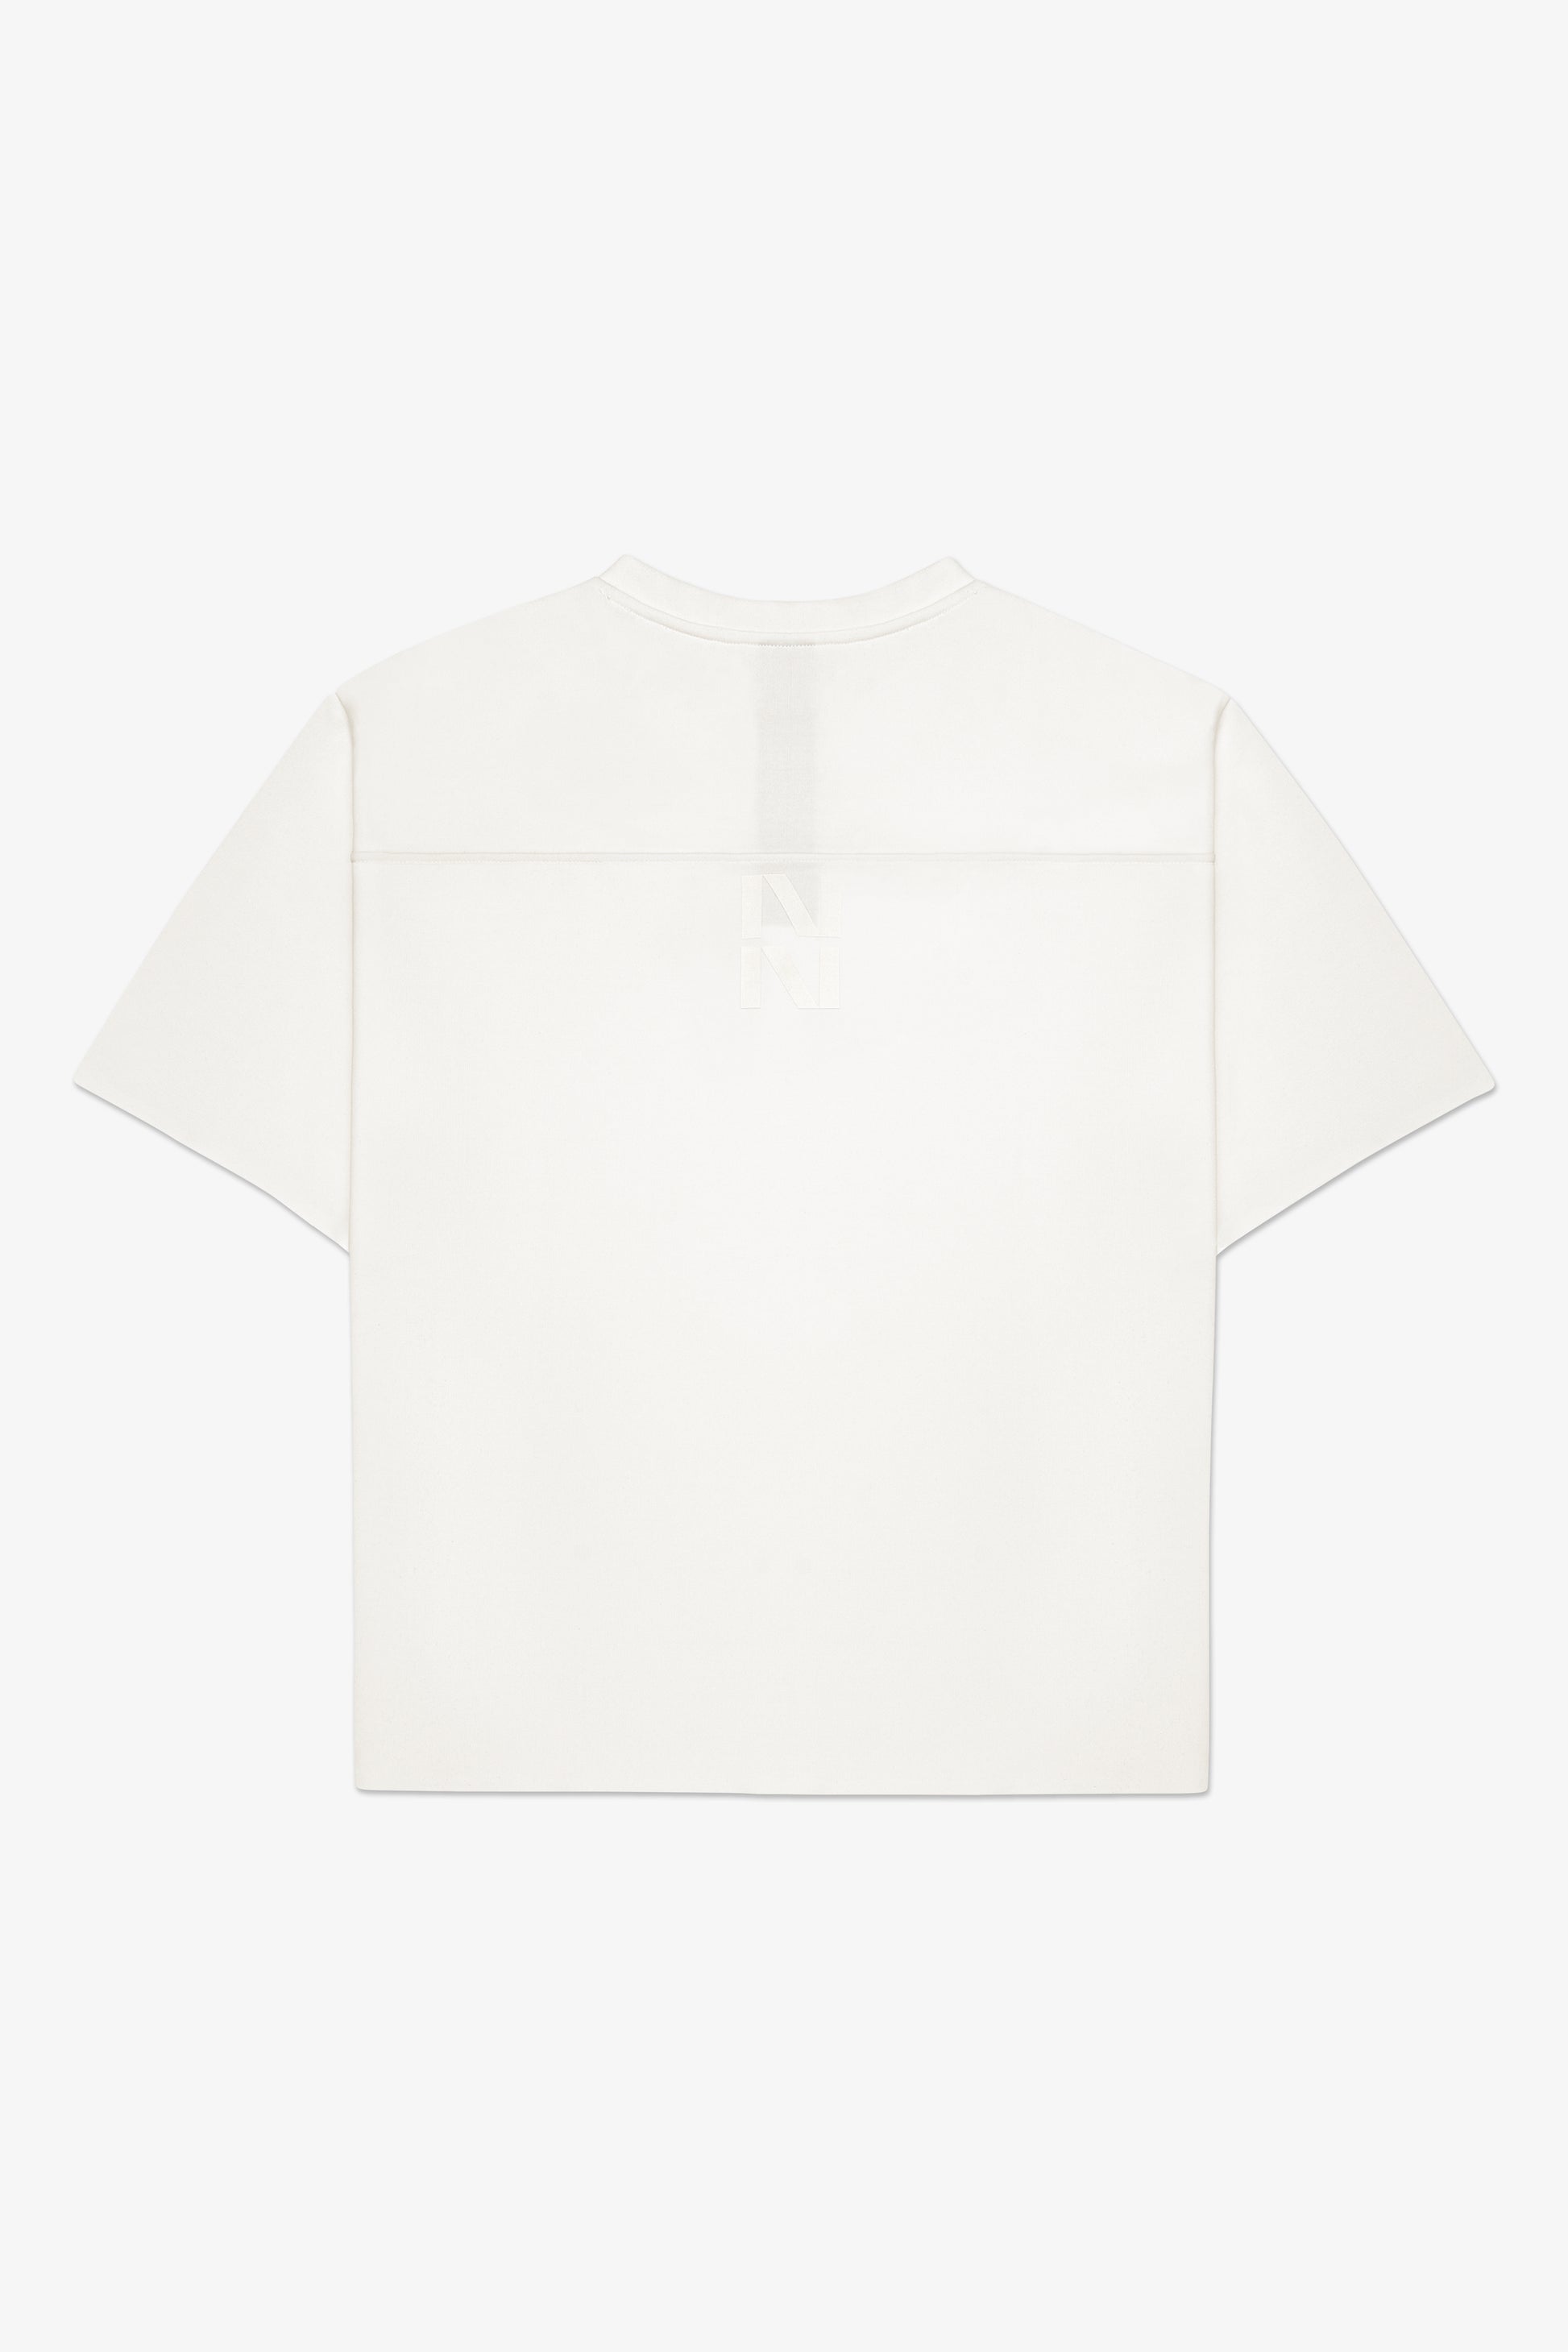 Back of white boxy t-shirt with NN logo on the center